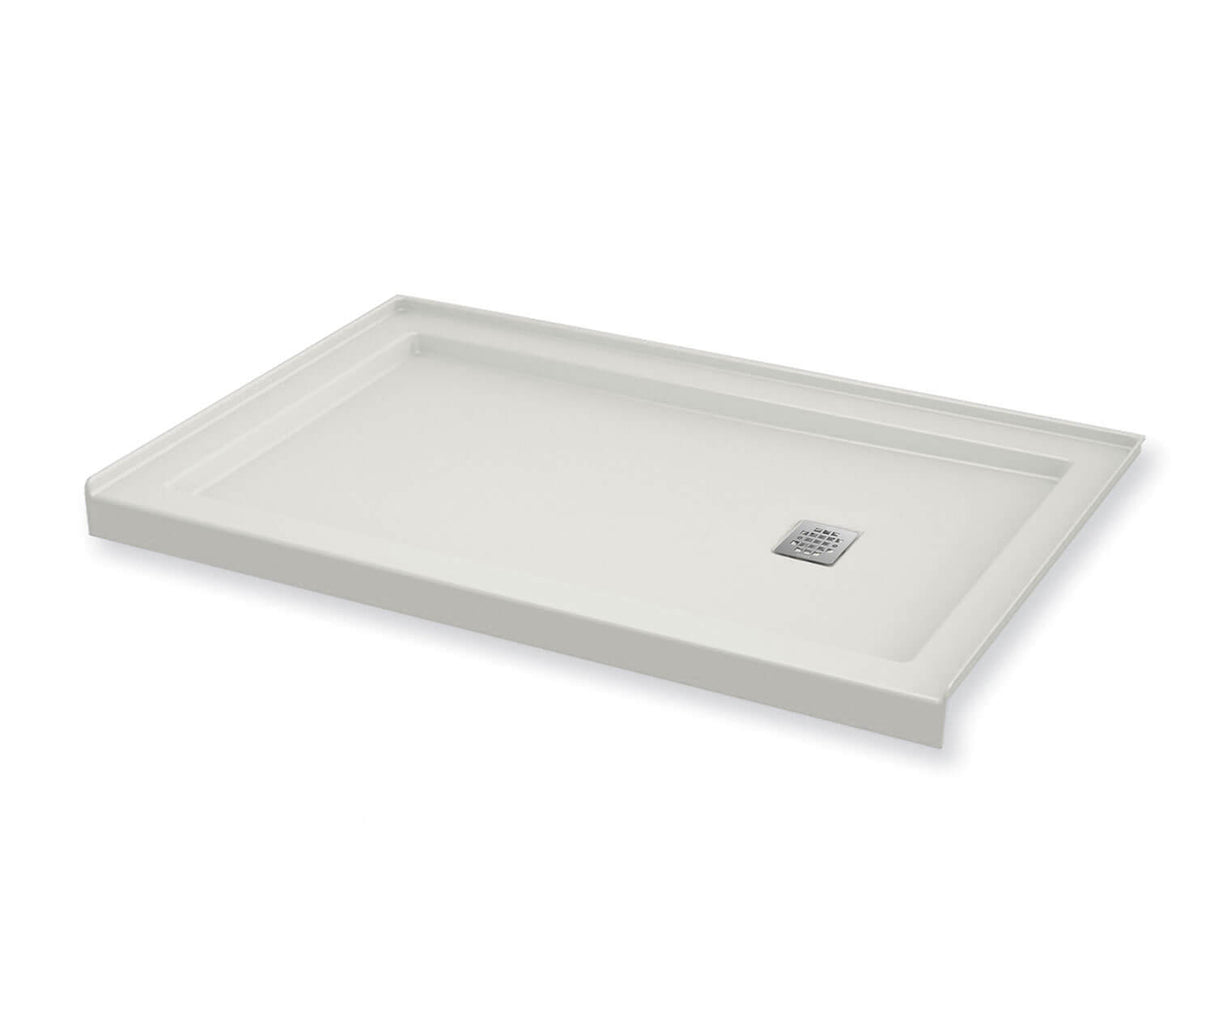 MAAX 420004-501-001-101 B3Square 6030 Acrylic Alcove Shower Base in White with Right-Hand Drain